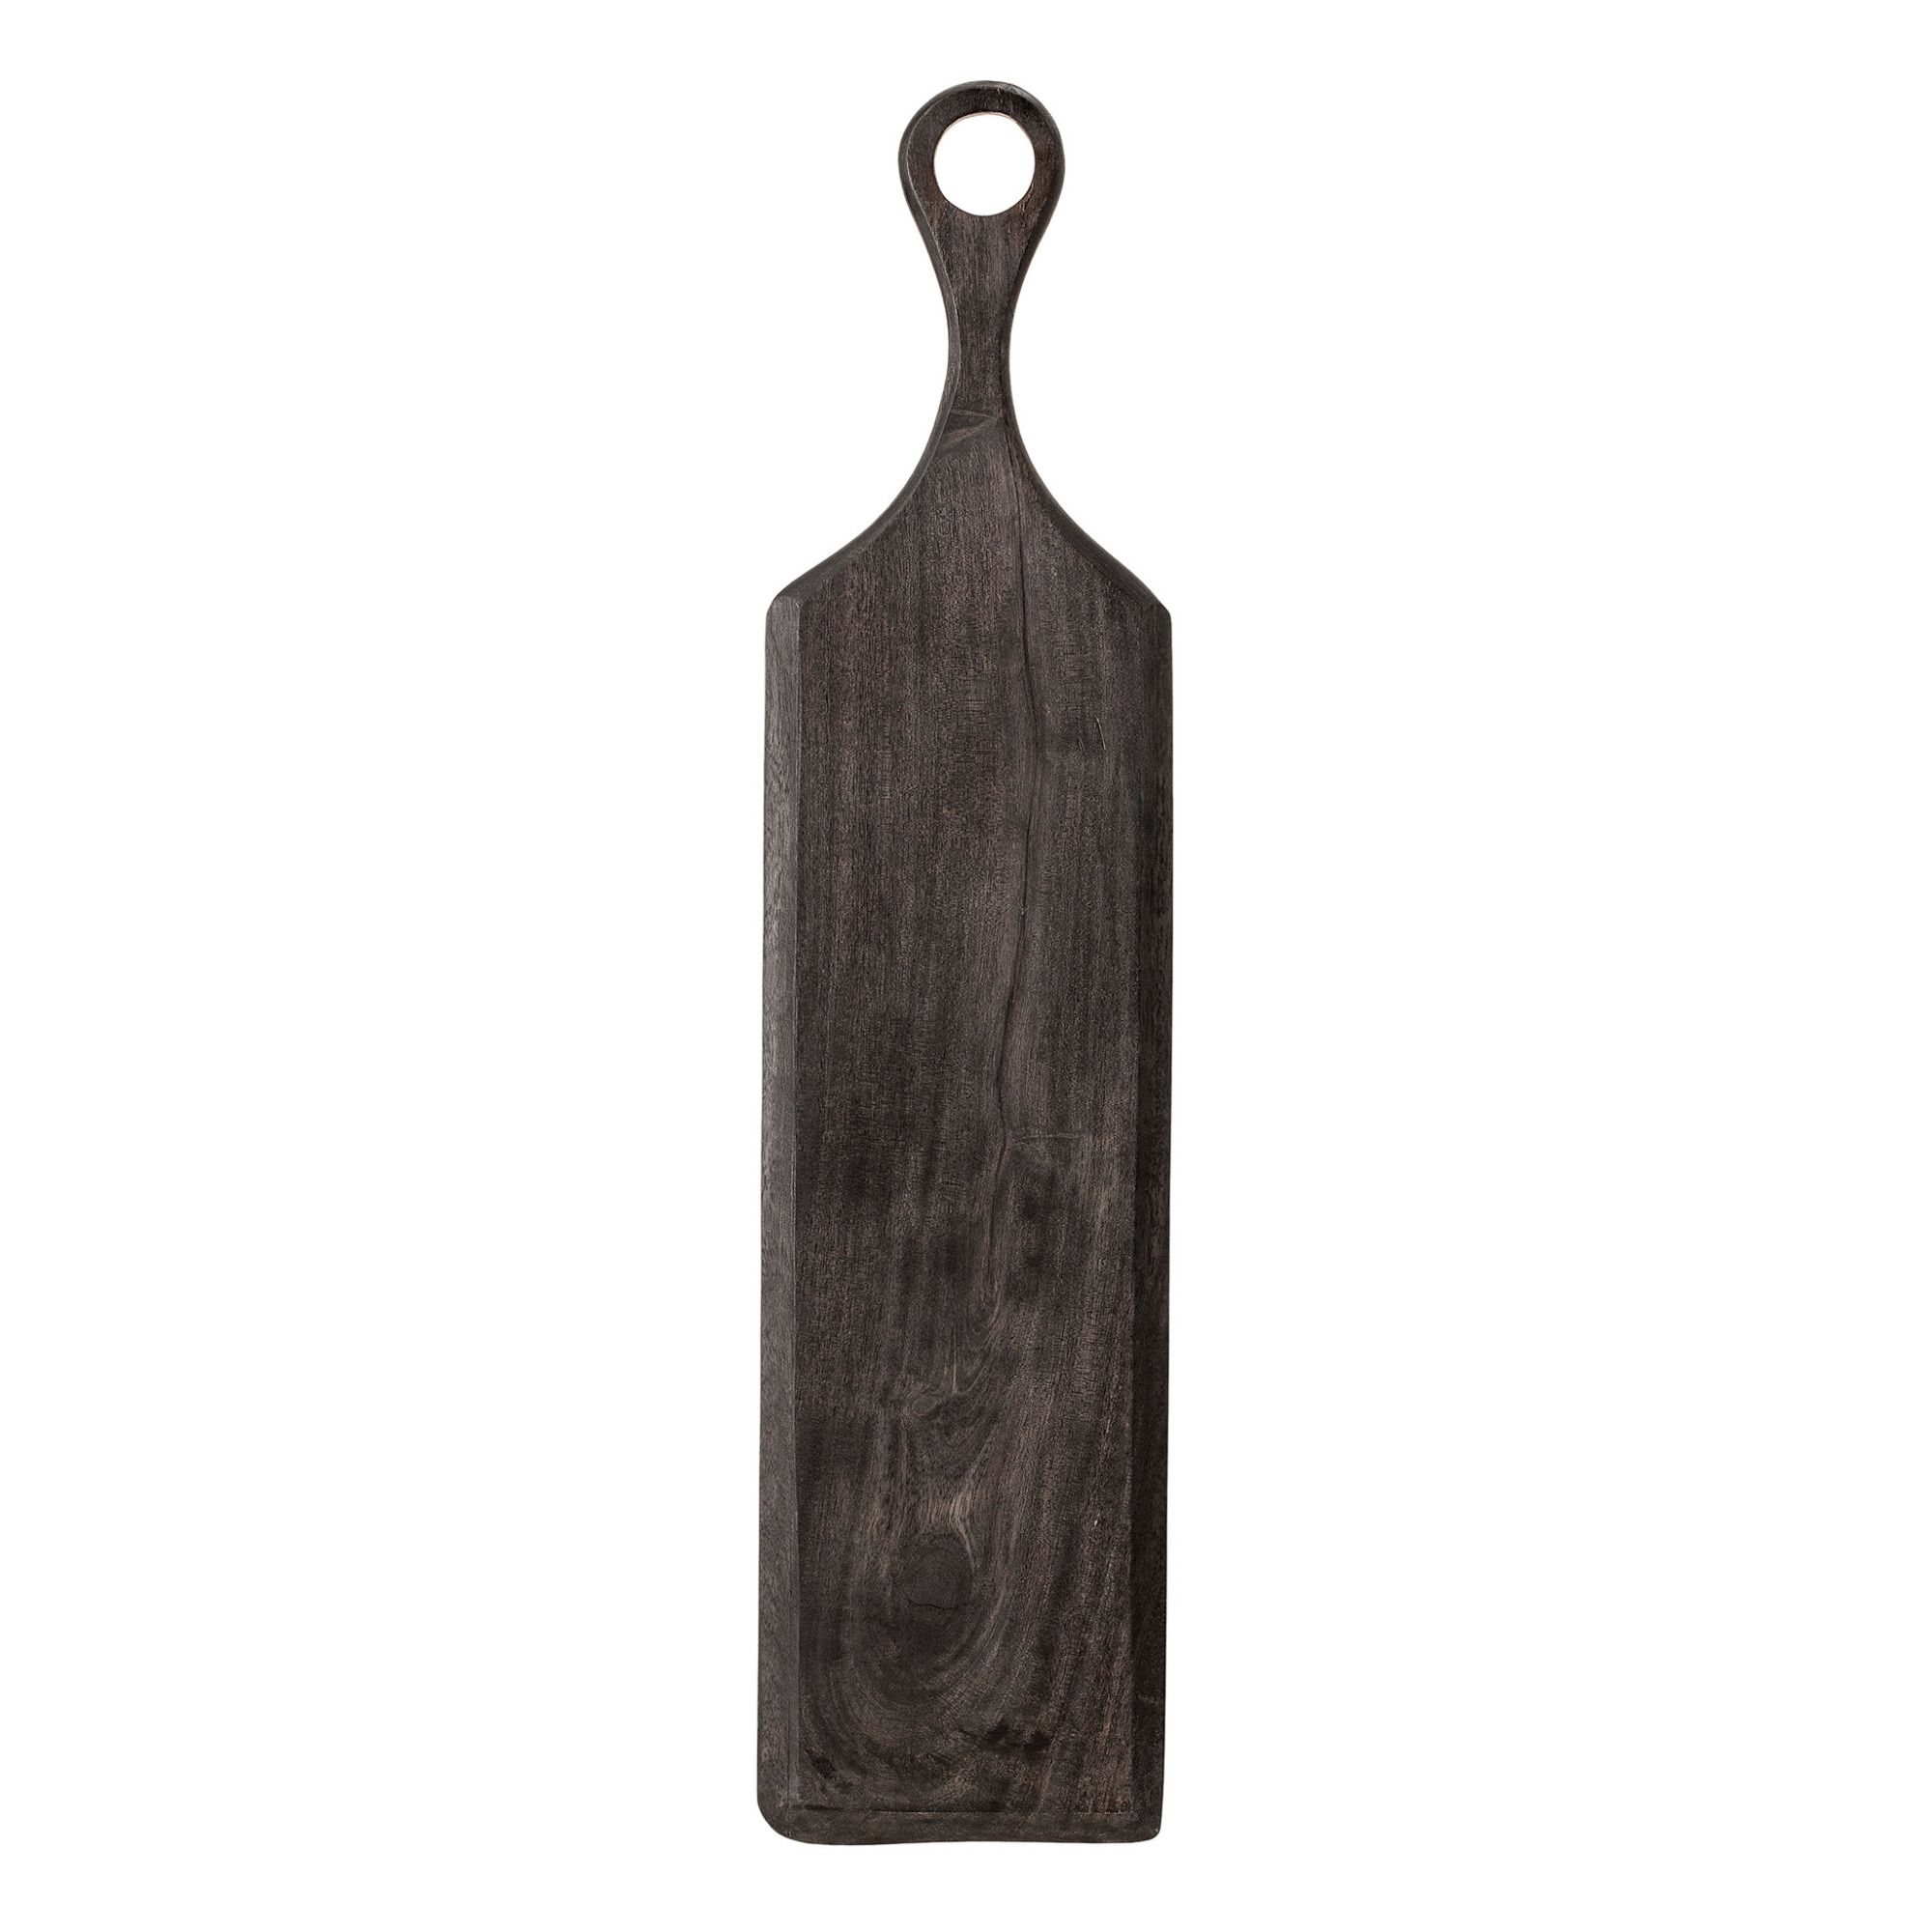 Bloomingville A40701430 Acacia Wood Cutting Board with Grey Print Brown